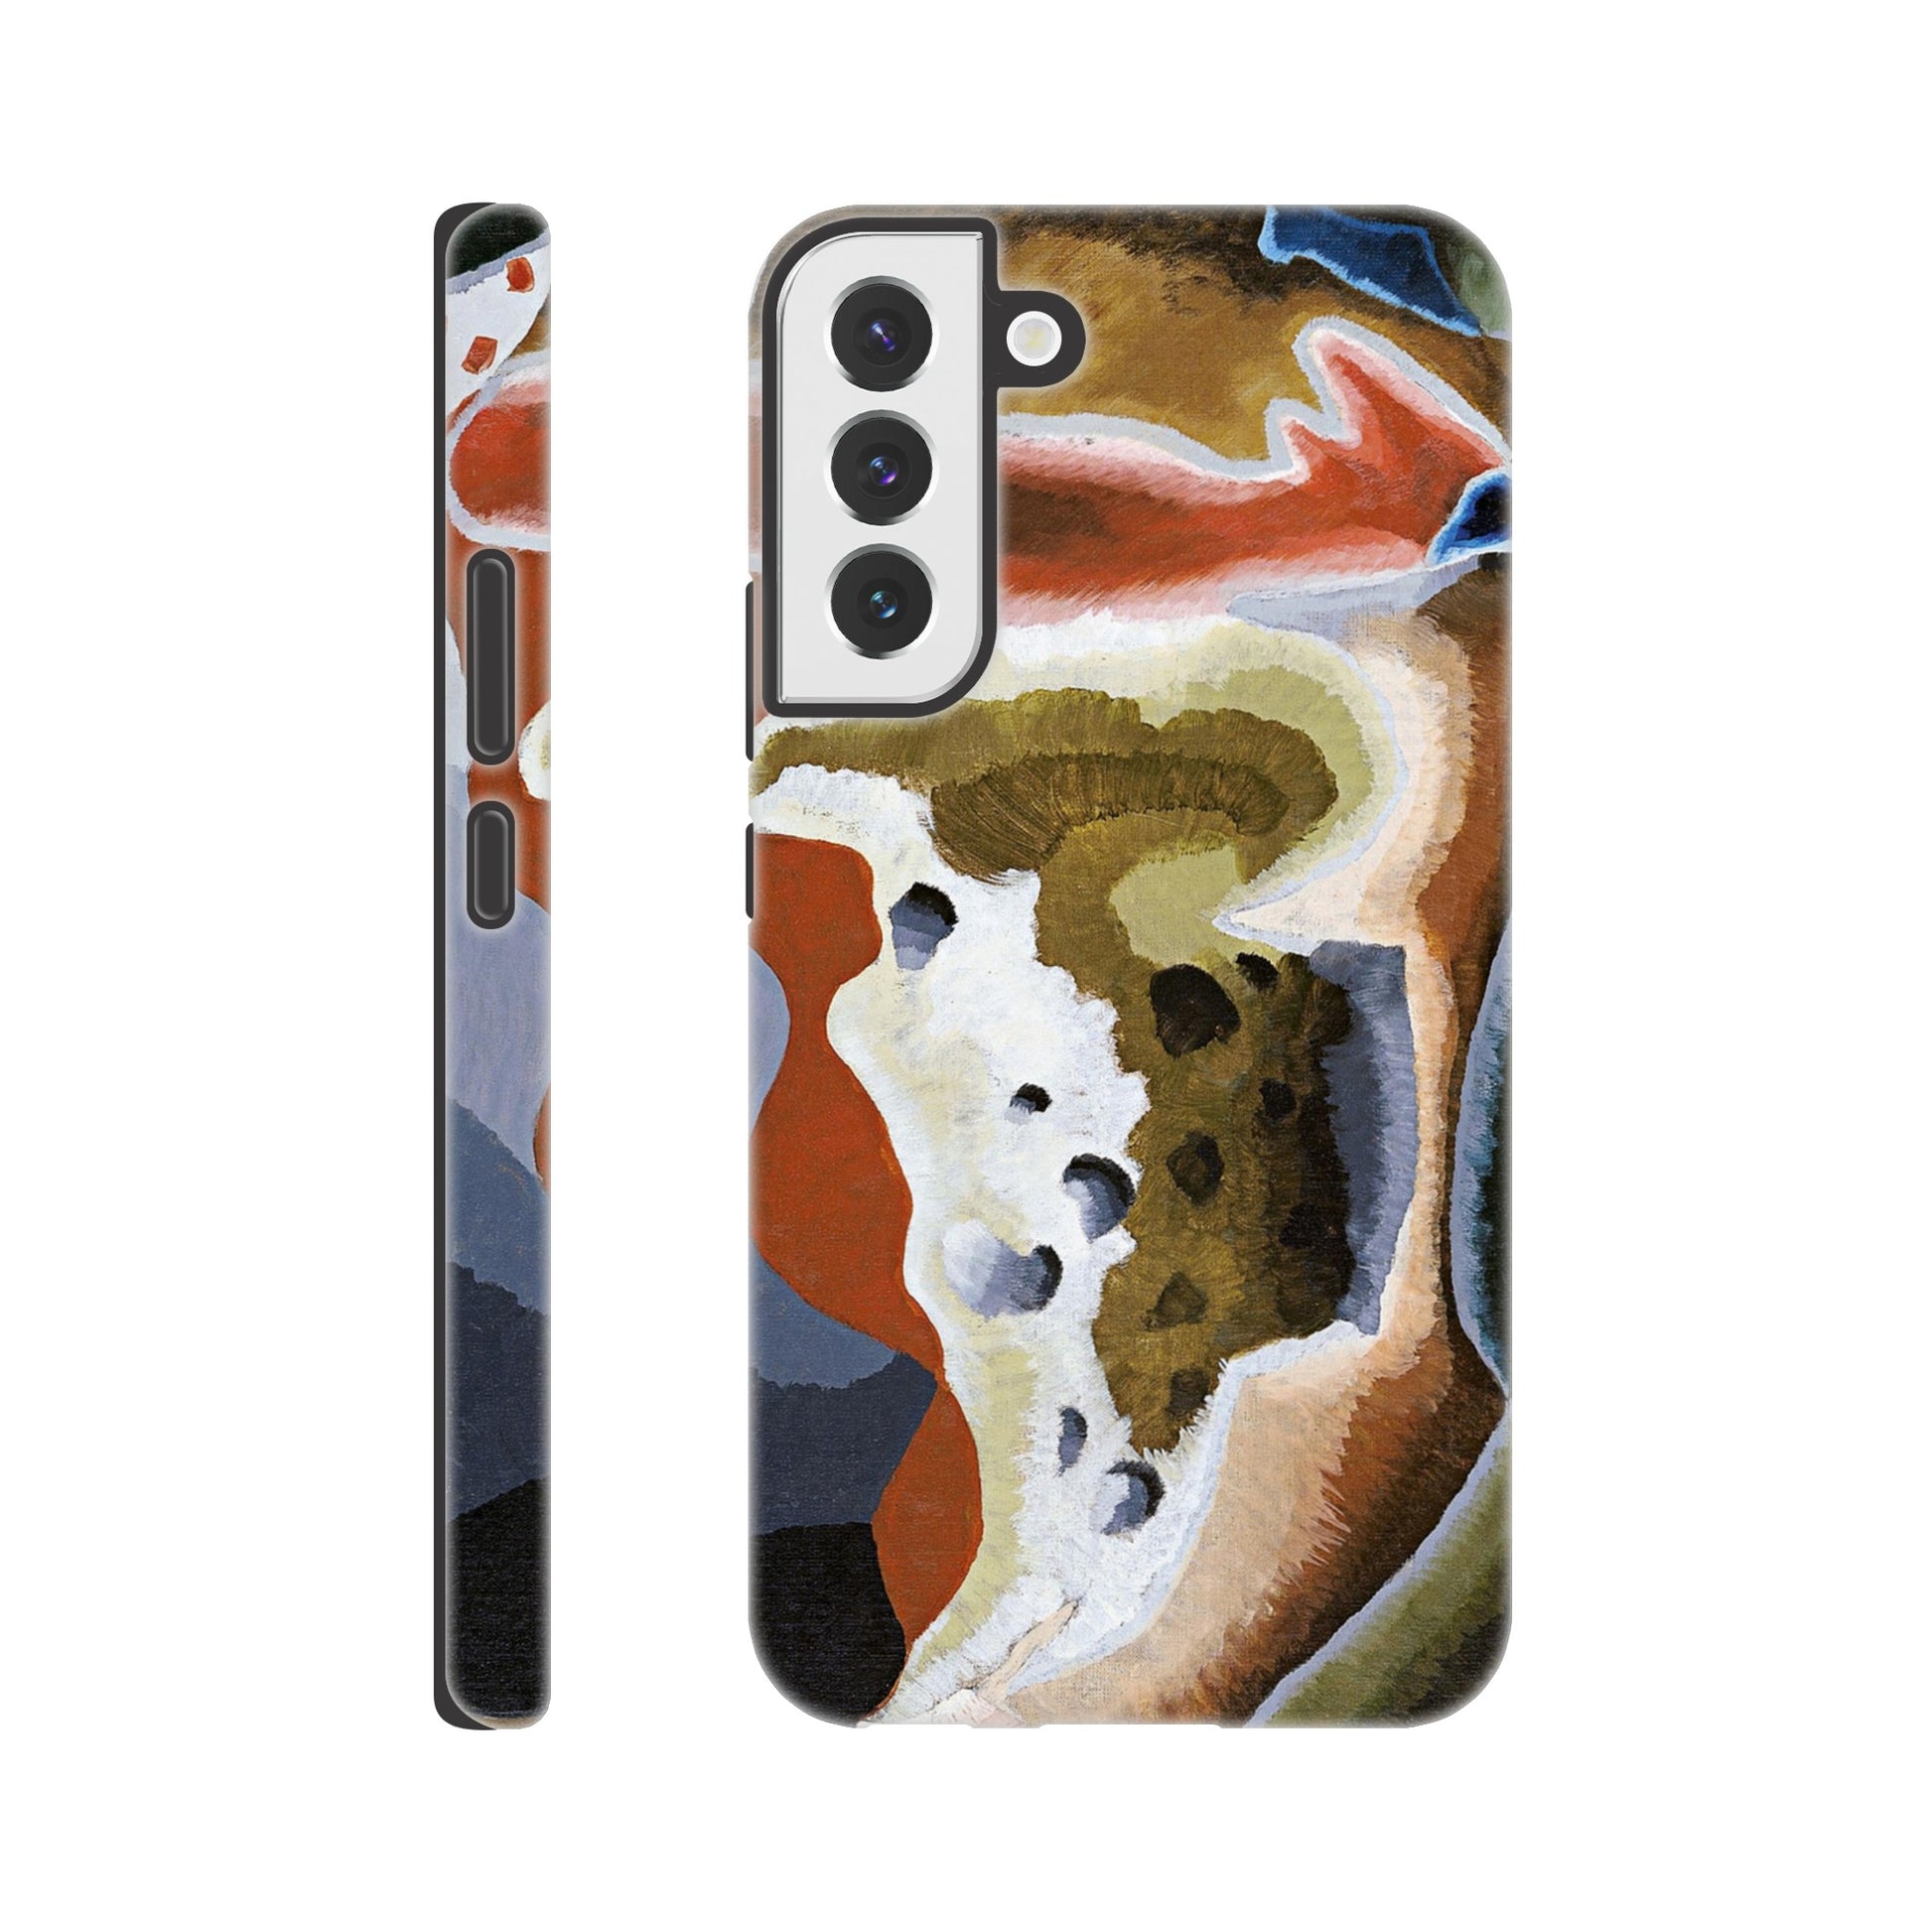 a phone case with a painting on it